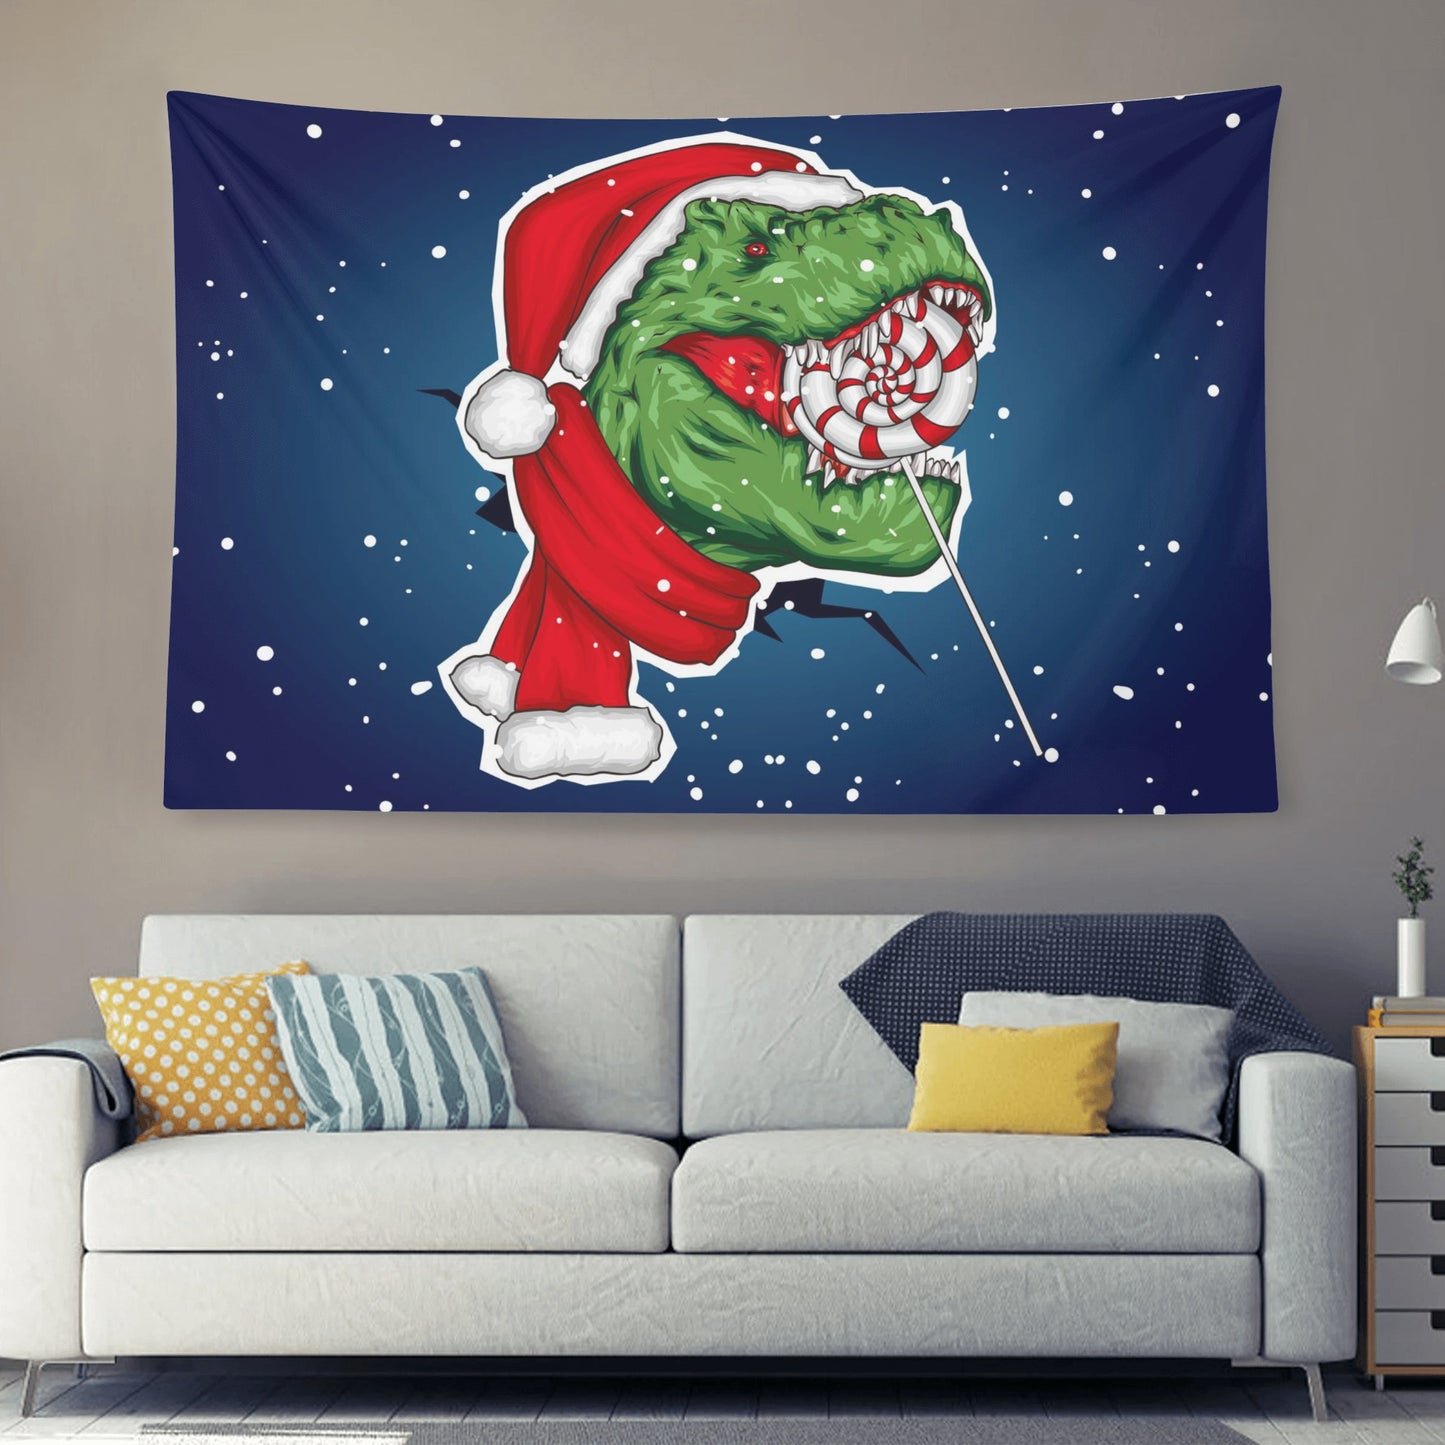 Dino Santa Brings Christmas Home With This Polyester Peach Skin Wall Tapestry 6 Sizes